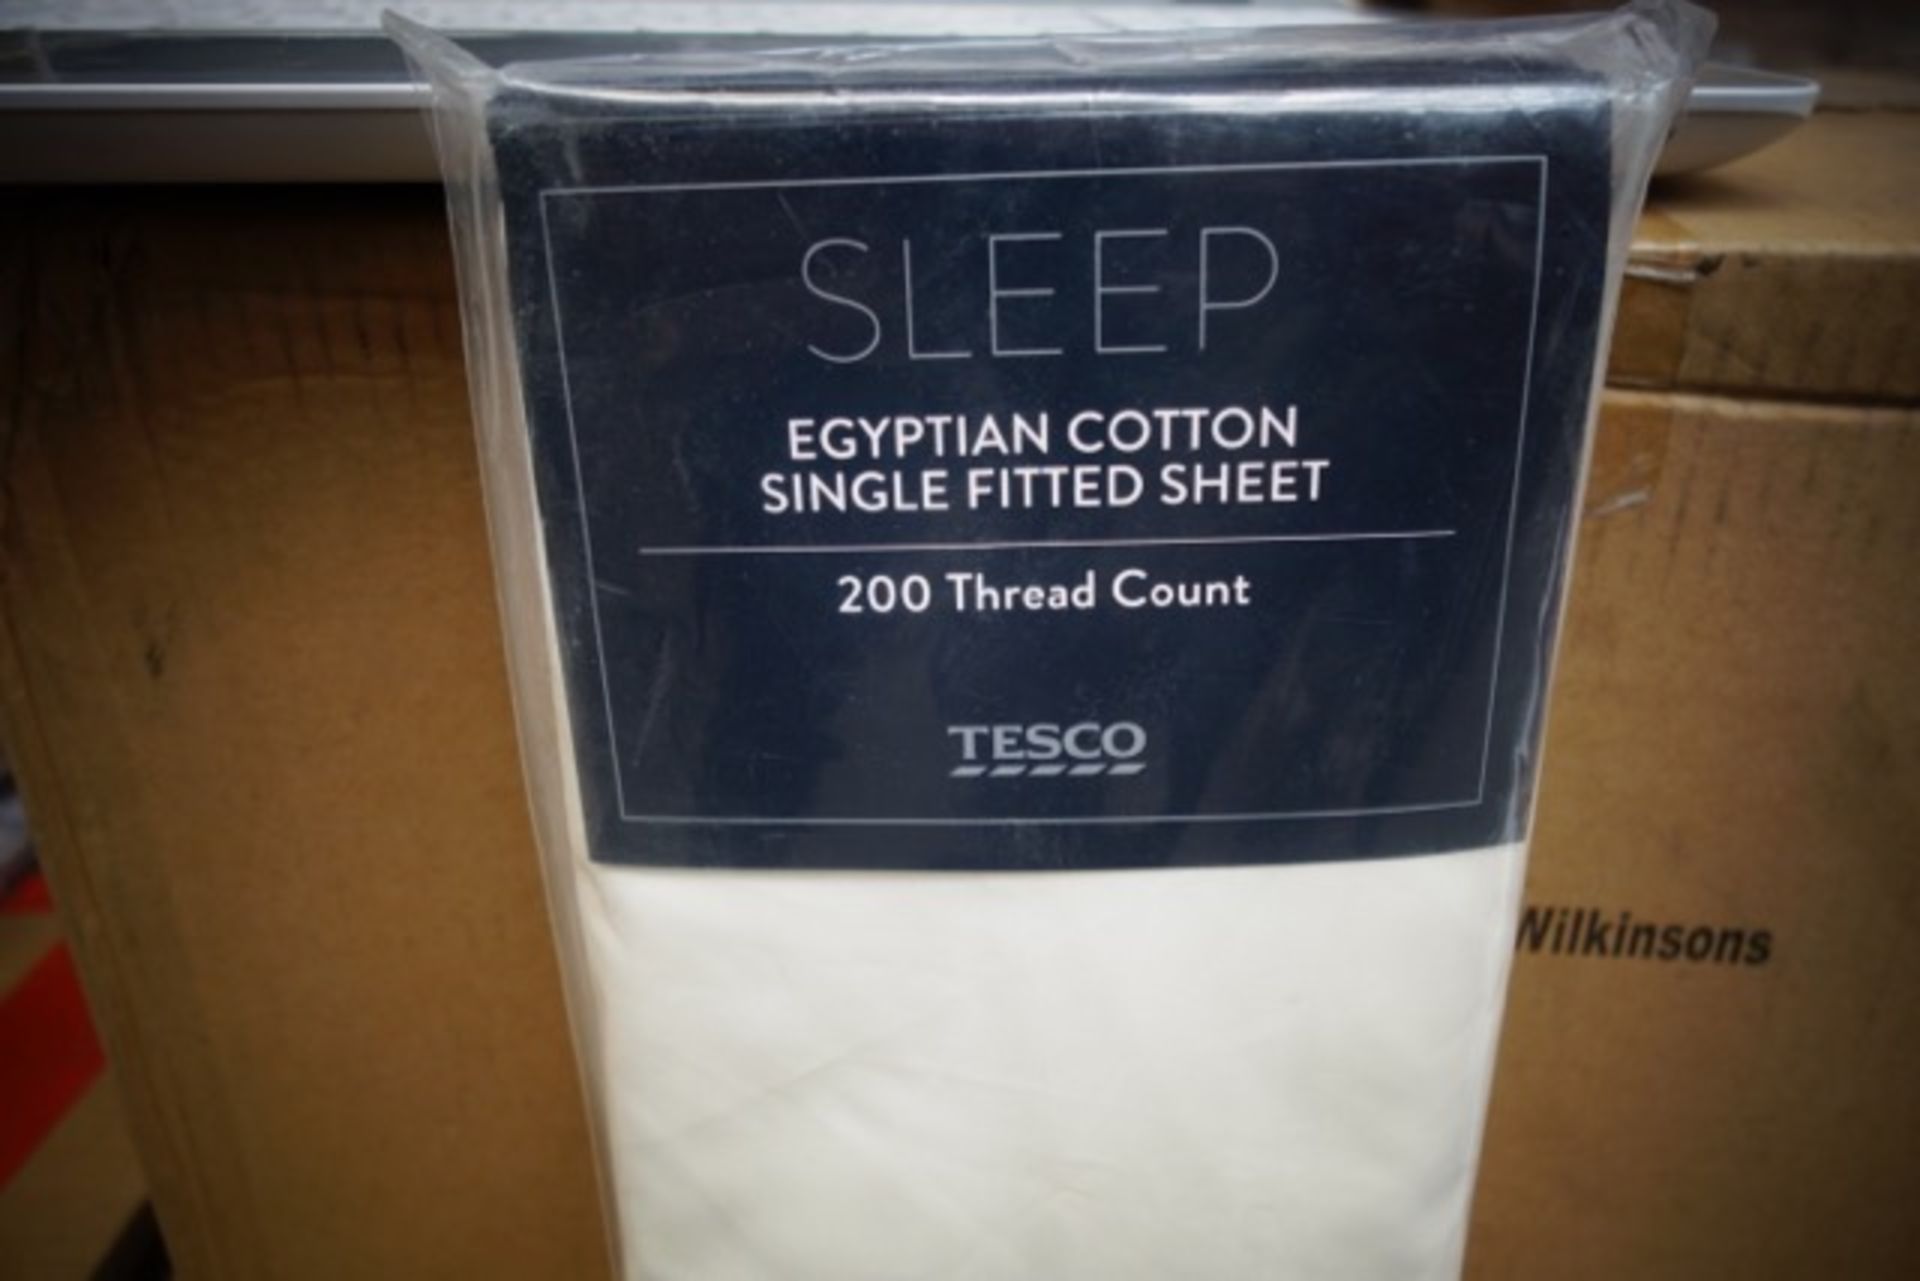 25 x Brand New Sleep Egyptian Cotton Single Fitted Sheets - 200 Thread Count. RRP £12.99 each - Image 2 of 2